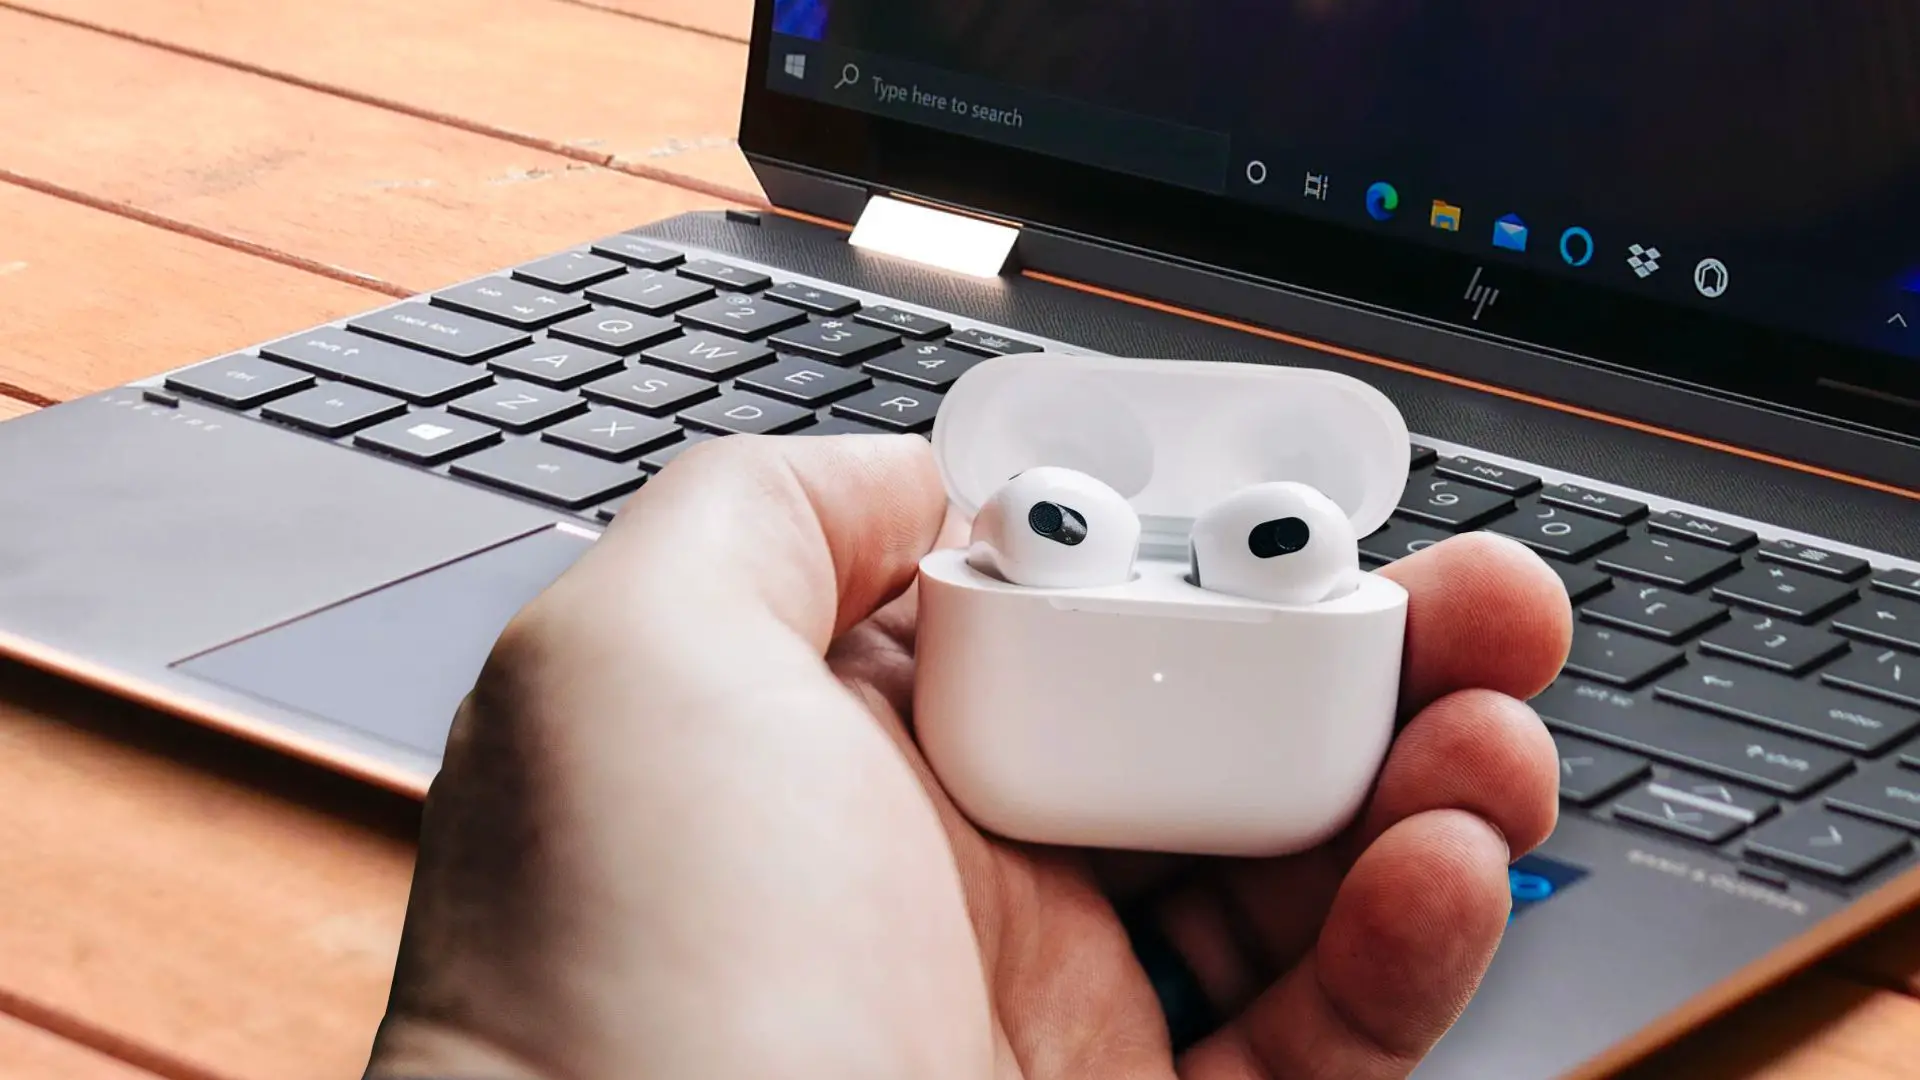 How to pair AirPods to HP laptop